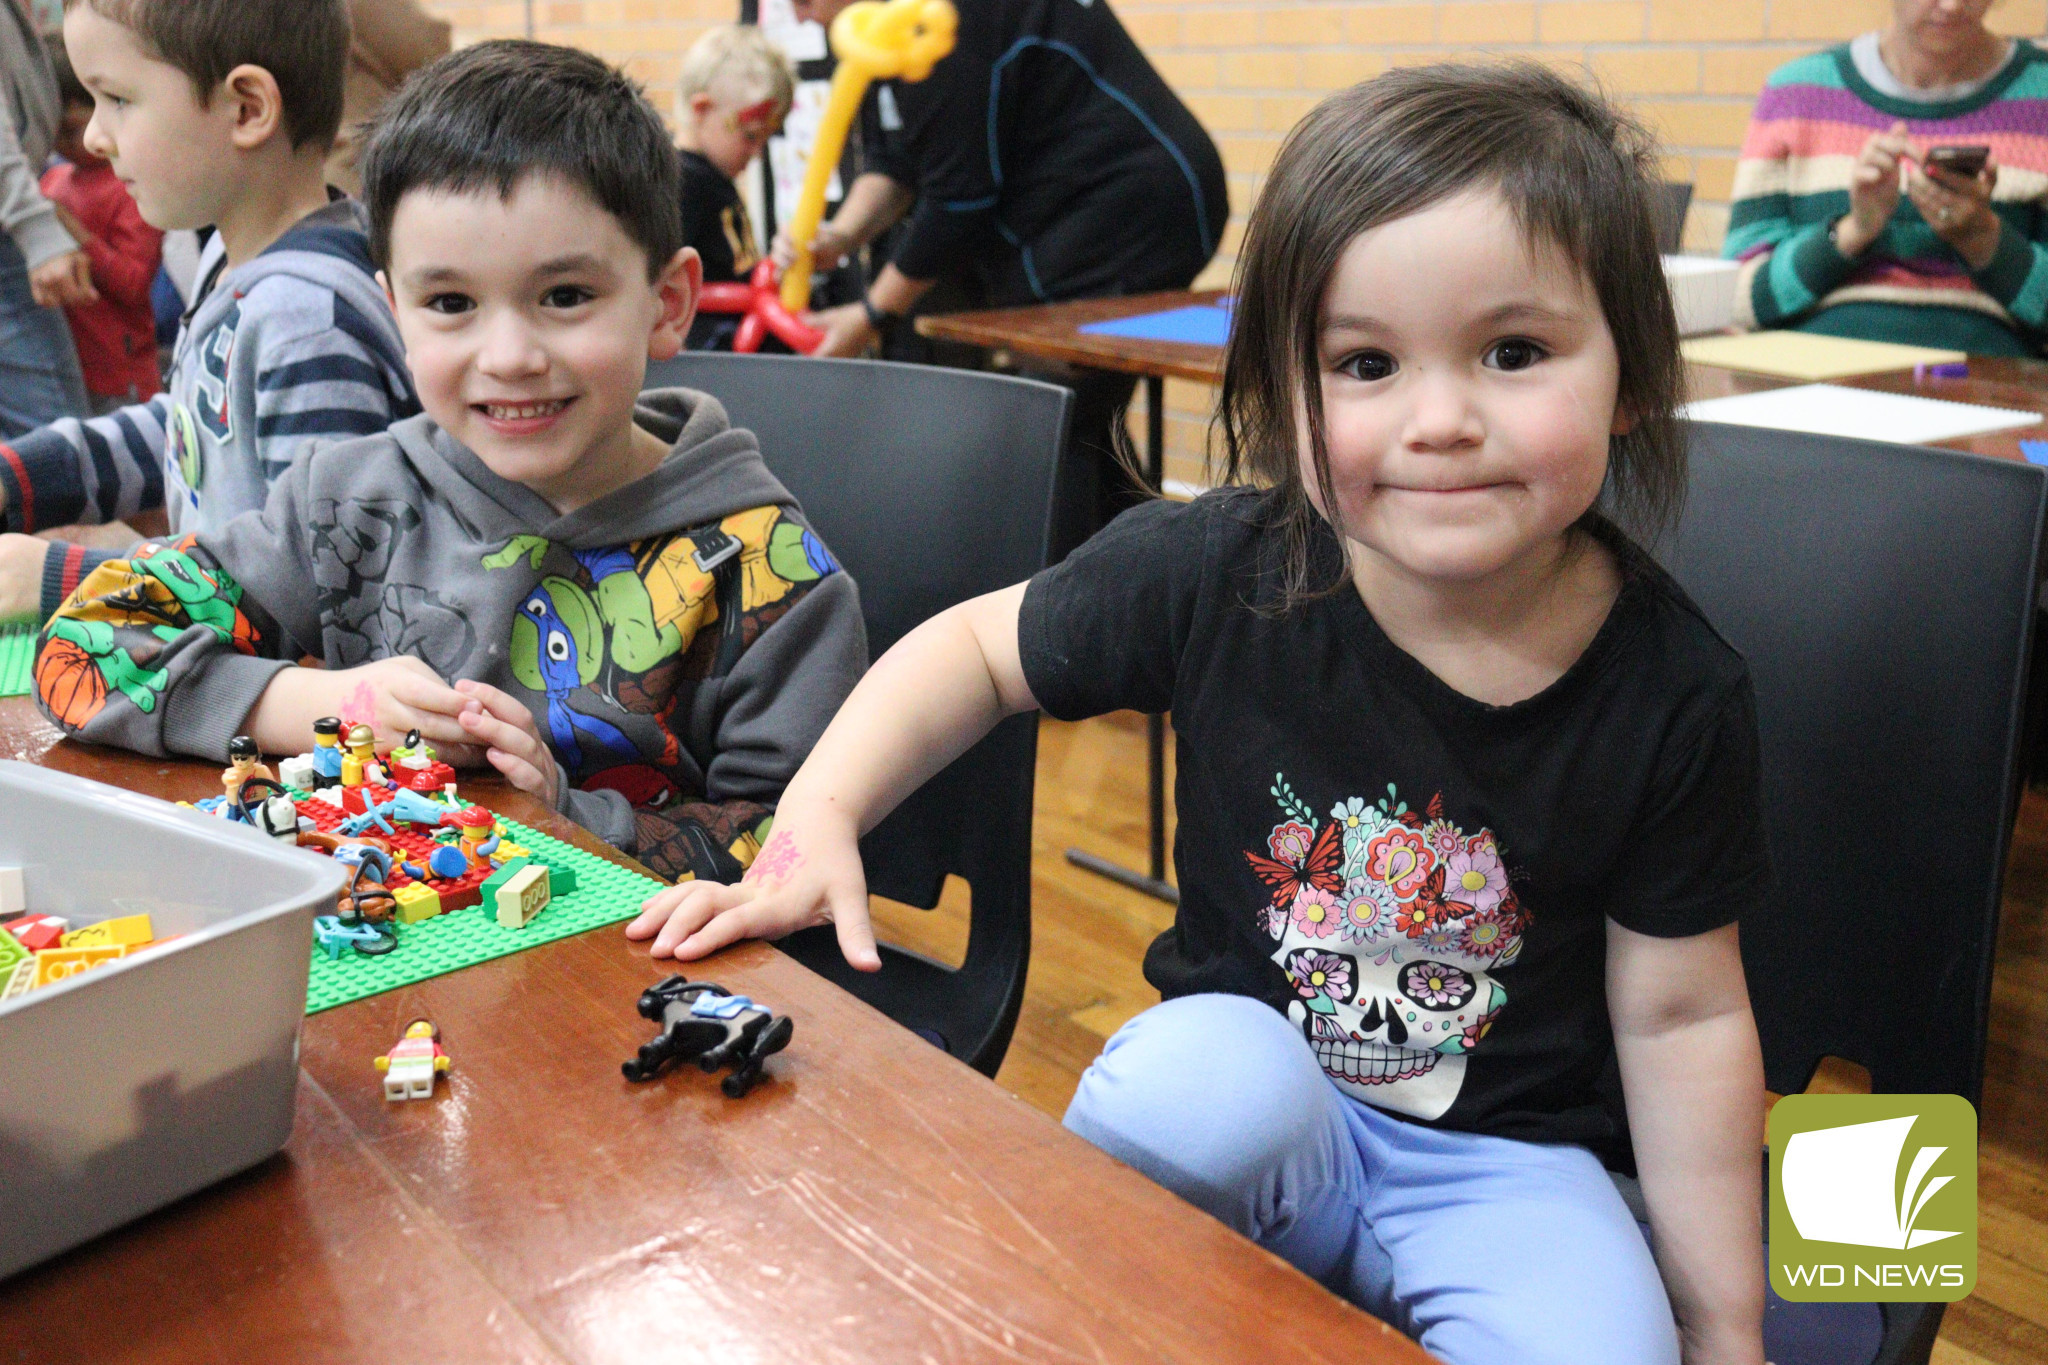 Maximino and Ava Stacey spent time playing with Lego.